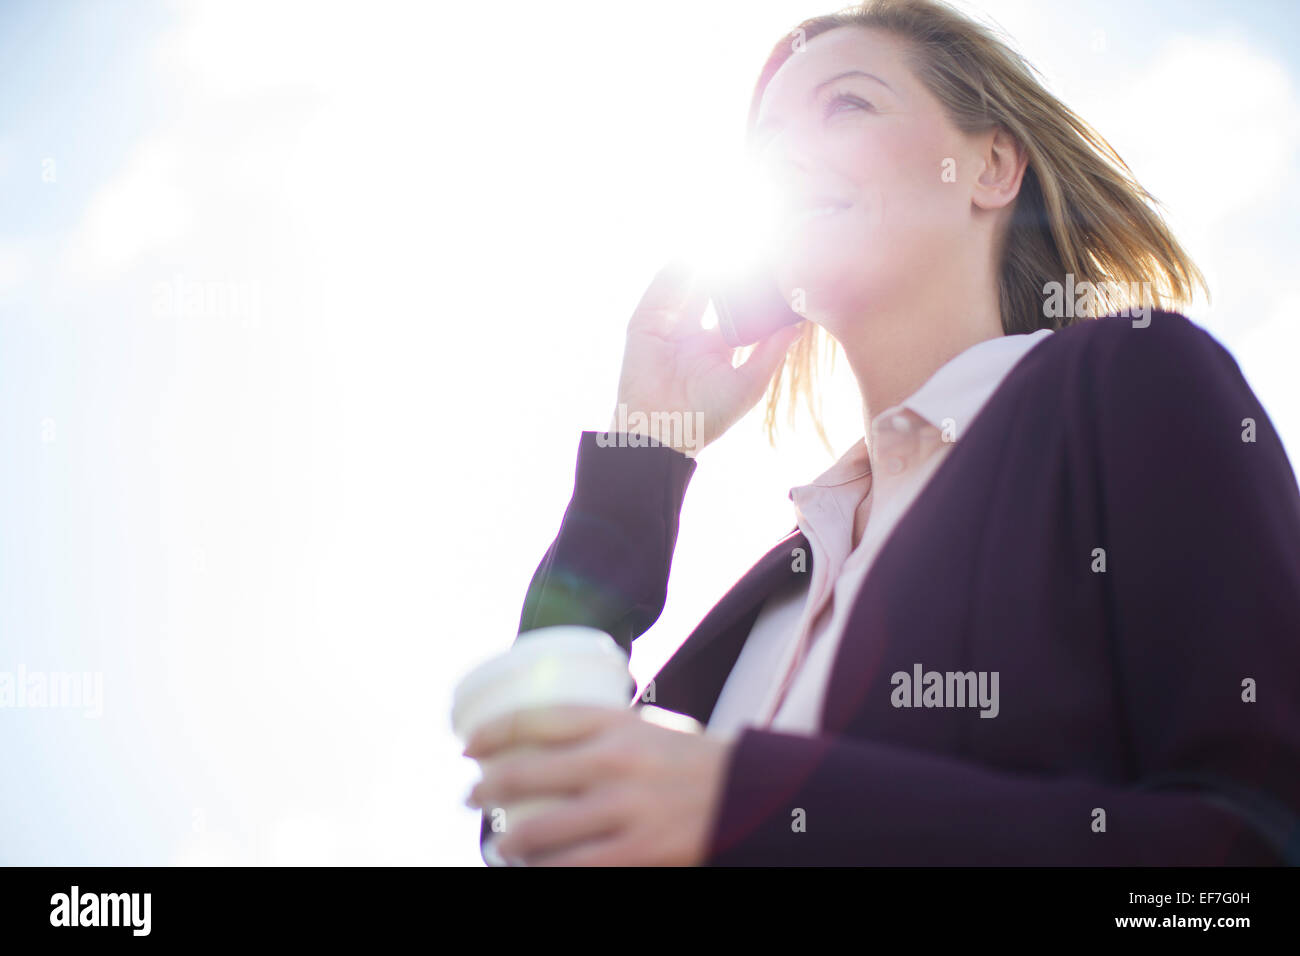 Low angle view of businesswoman talking on cell phone Stock Photo